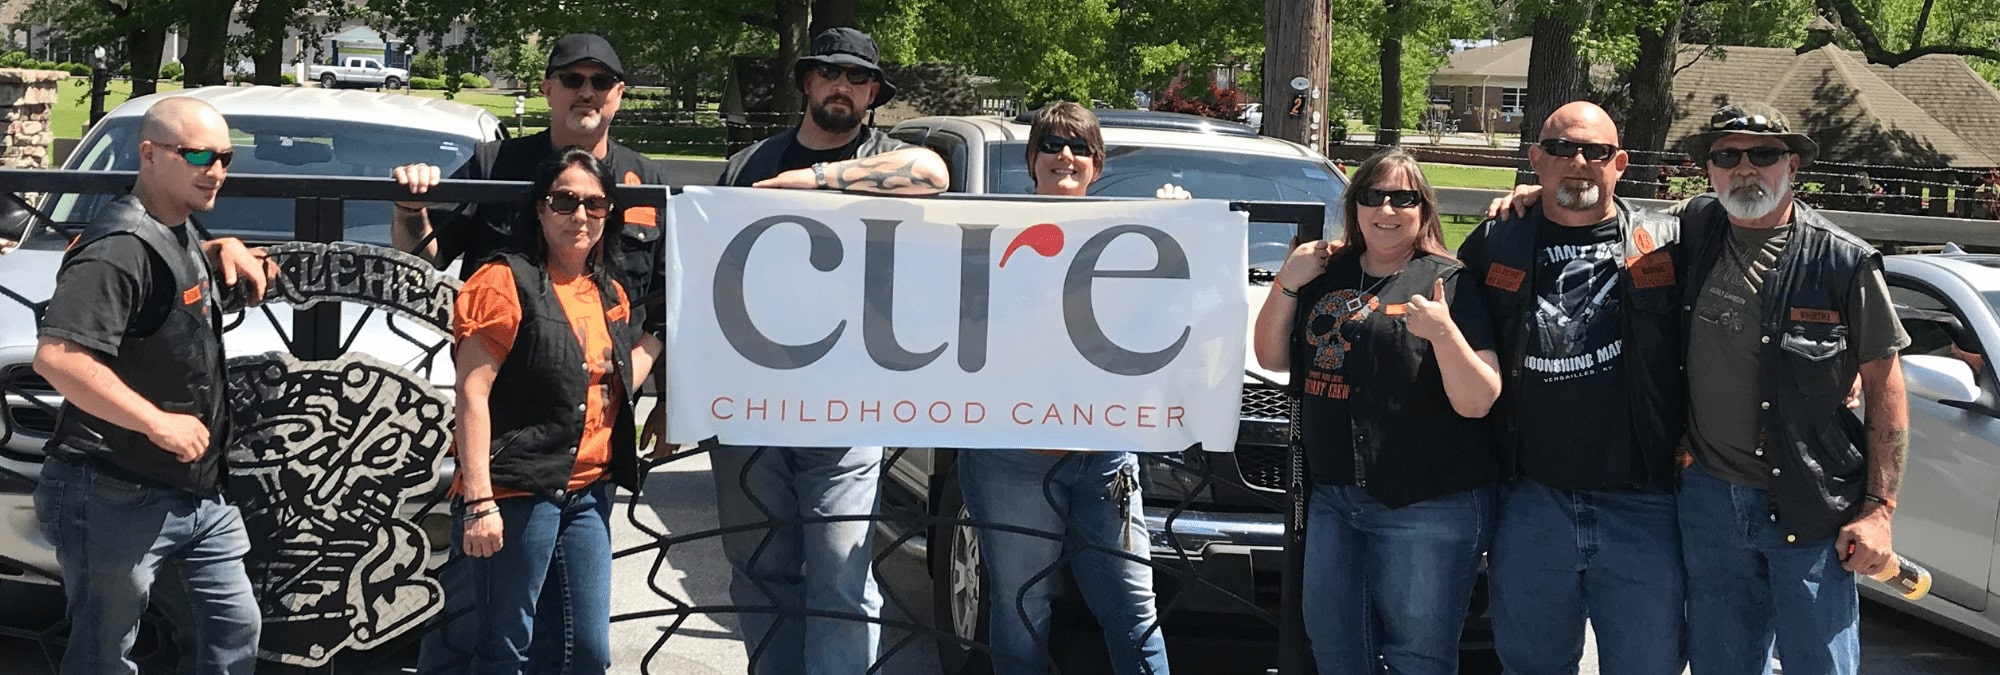 Bikers Battling for Kids Cancer motorcycle charity ride